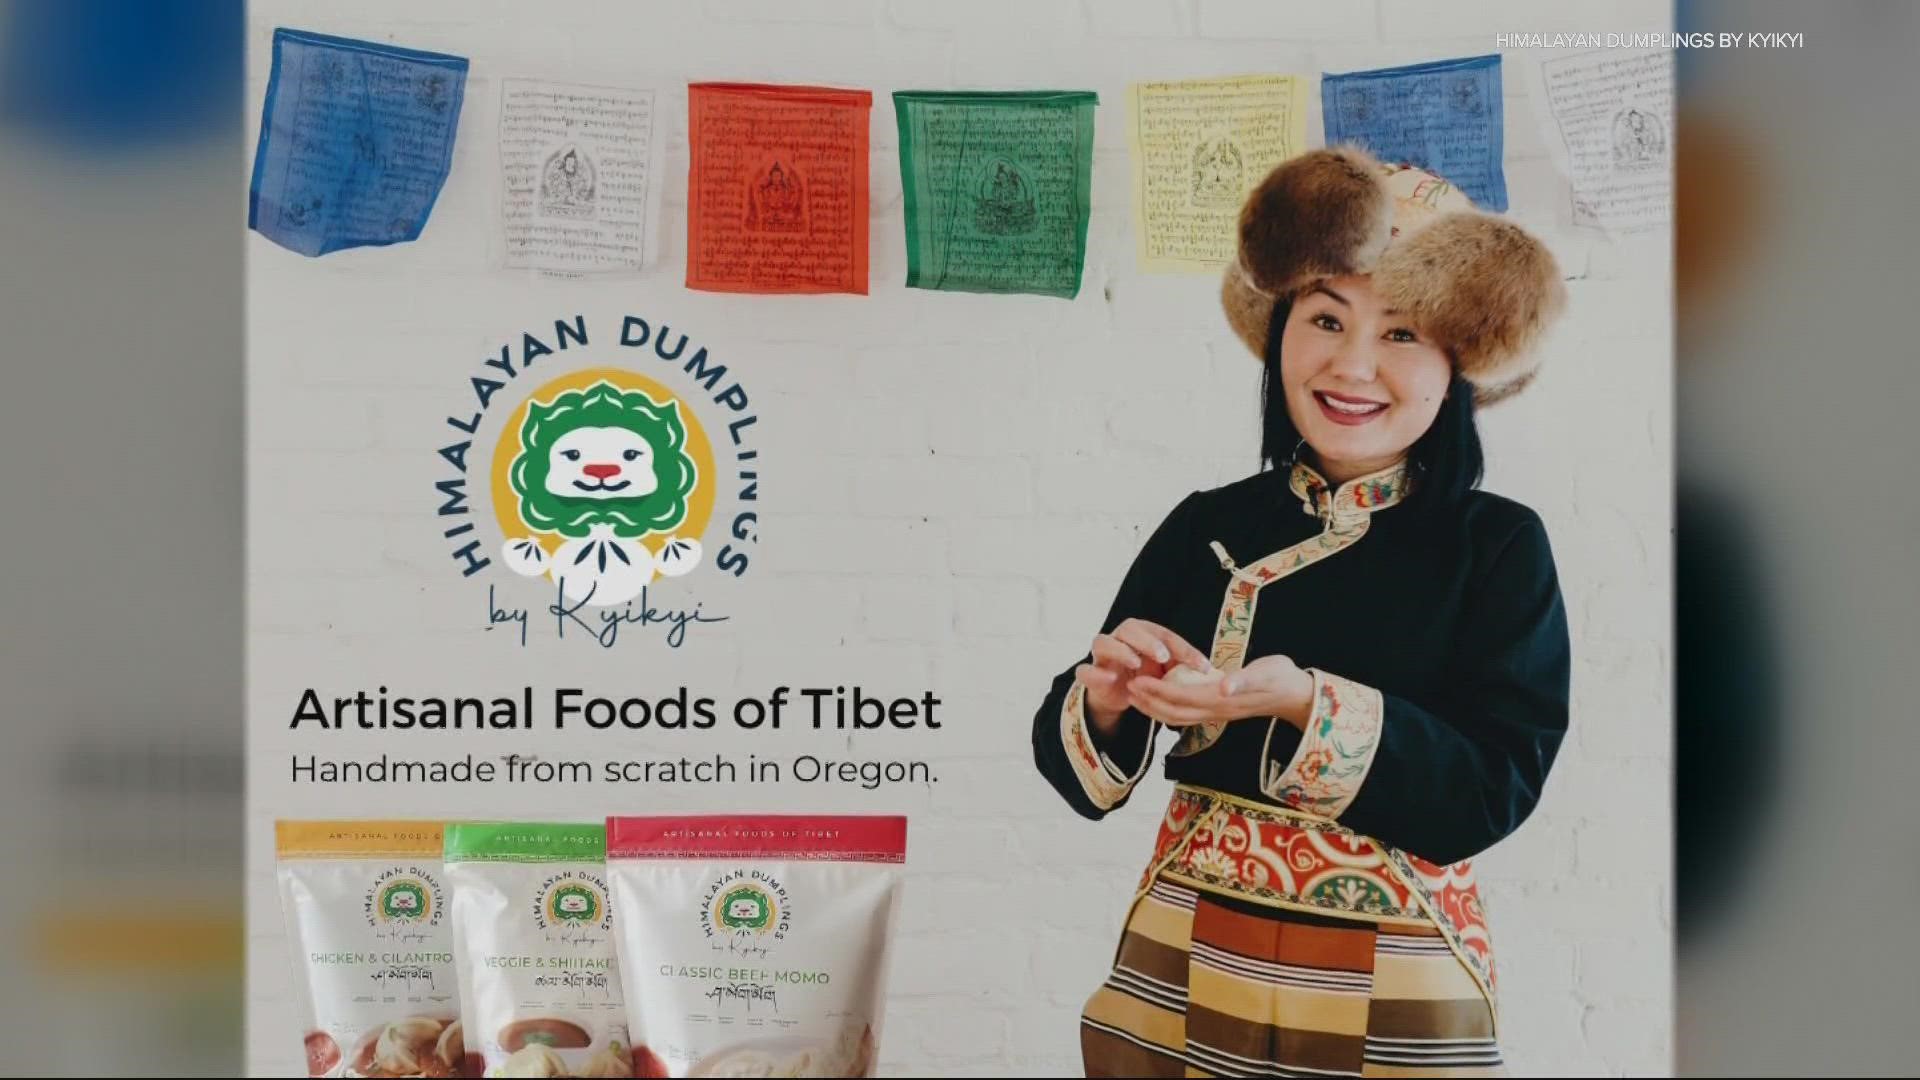 KyiKyi began selling Himalayan dumplings at the Beaverton Night Market. During the pandemic, she took the leap to start a frozen food line.